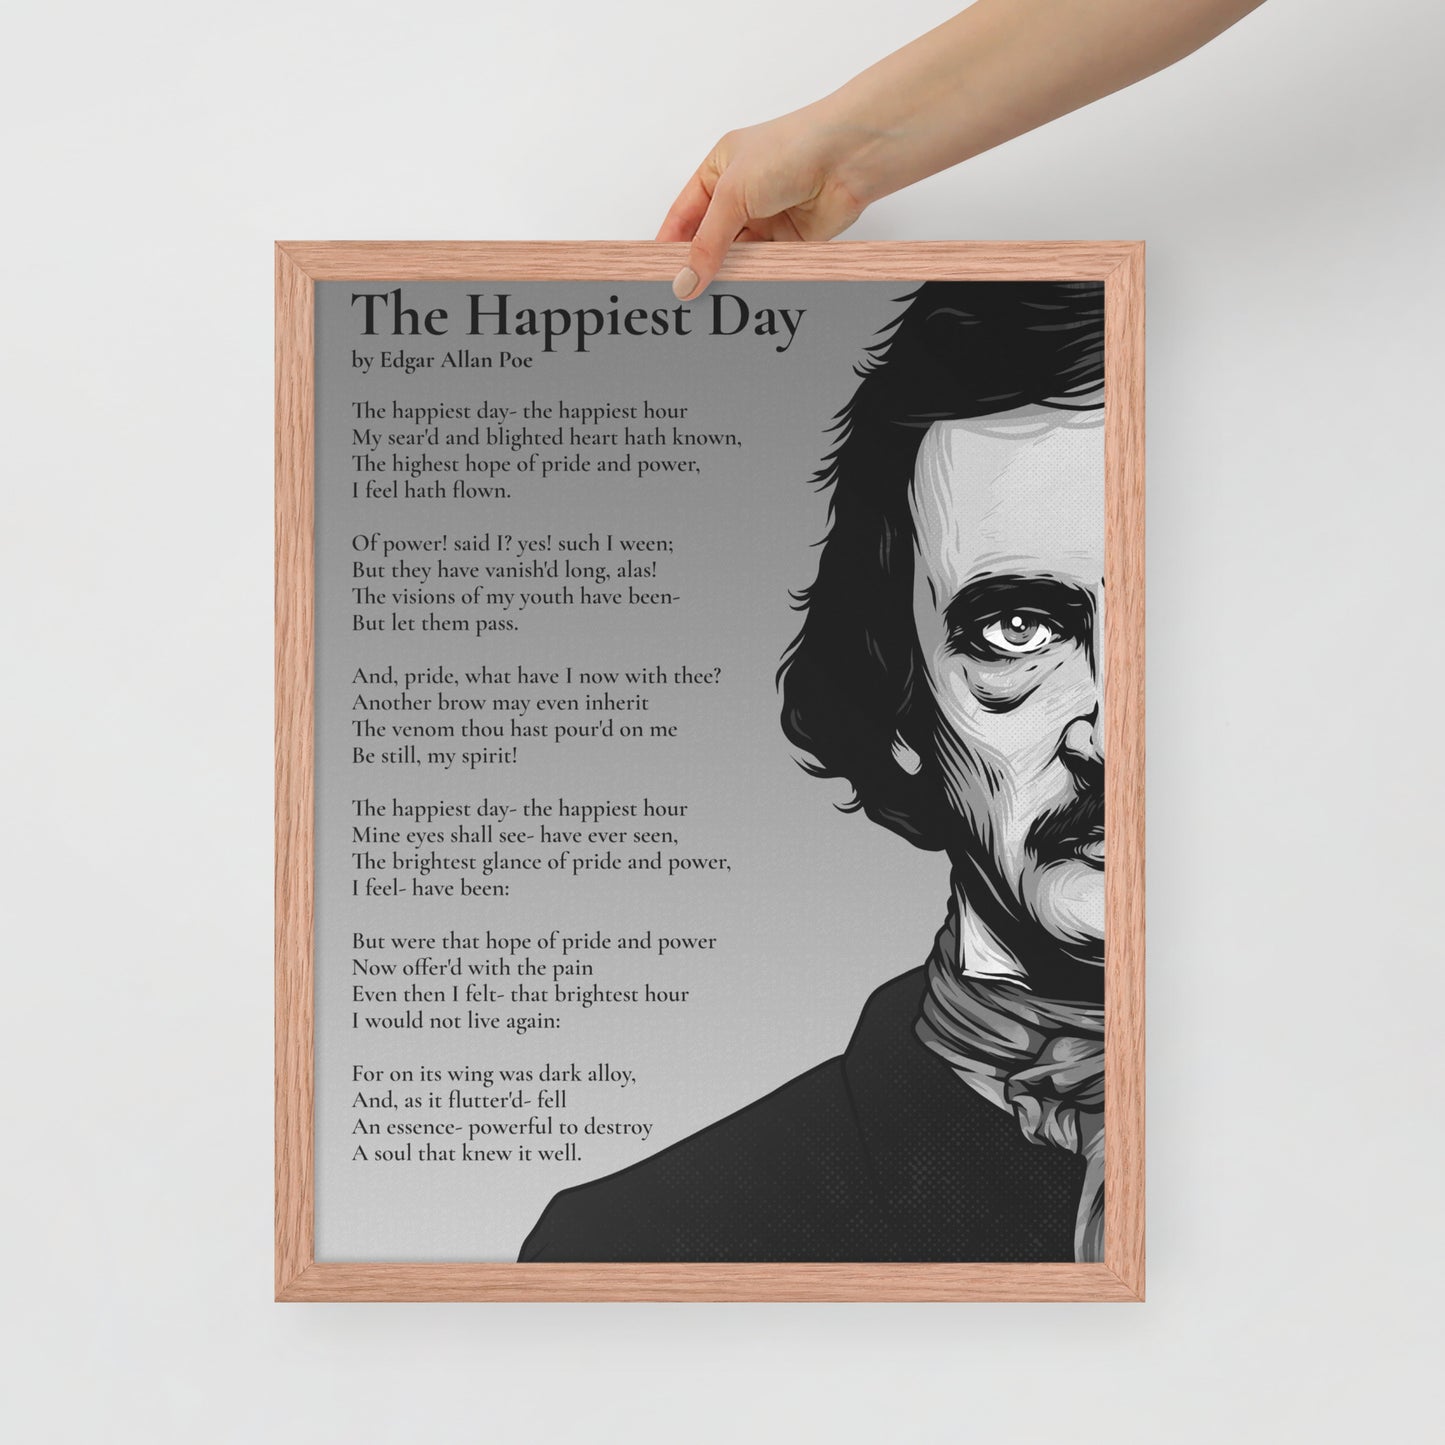 Edgar Allan Poe's 'The Happiest Day' Framed Matted Poster - 16 x 20 Red Oak Frame